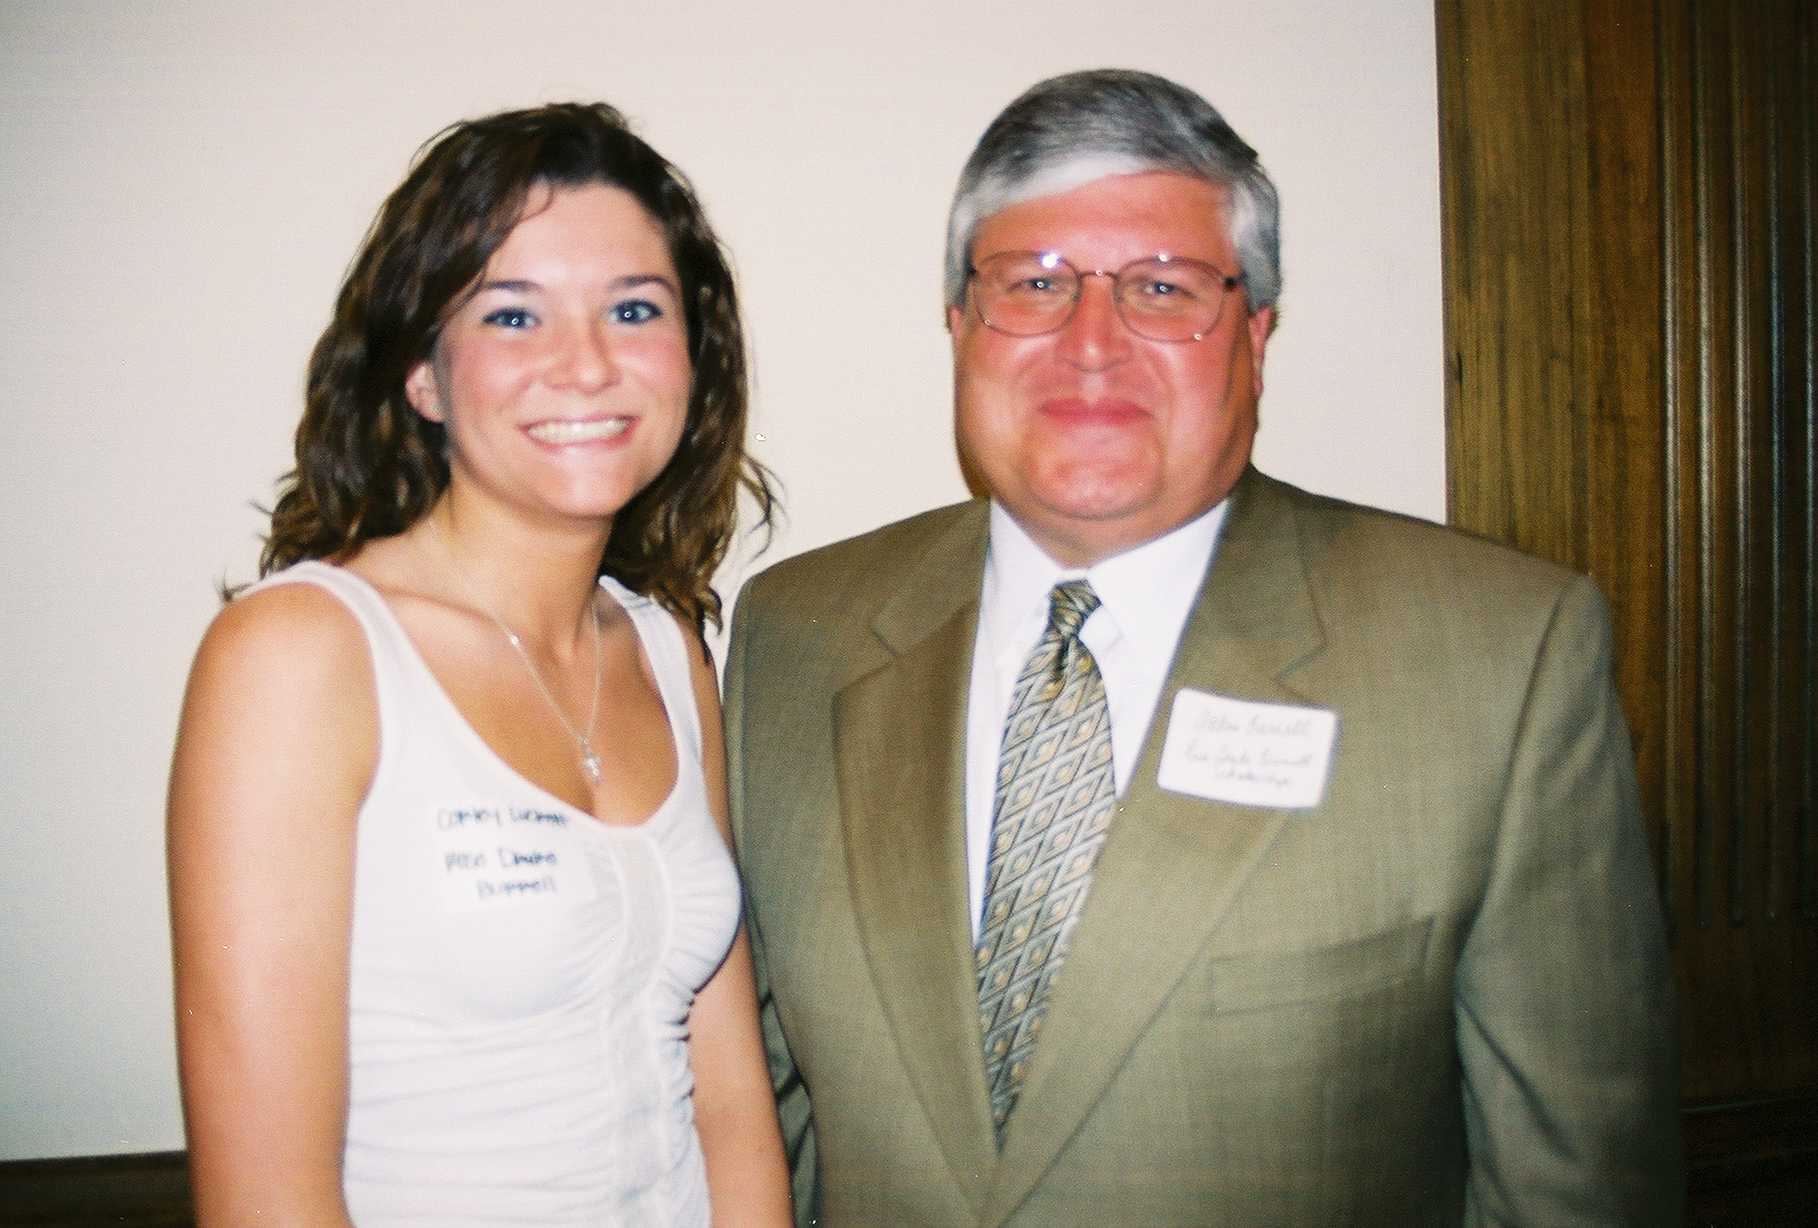 Photo: The Madison Foundation recently made a $25,000 grant to Delta State University in memory of Cleveland native, Allen Burrell (right). Corley Luckett Mullins, a 2010 graduate of Delta State, received the Allen and Rose Drake Burrell Scholarship in 2003 and visited with Allen at a scholarship reception in 2003. 